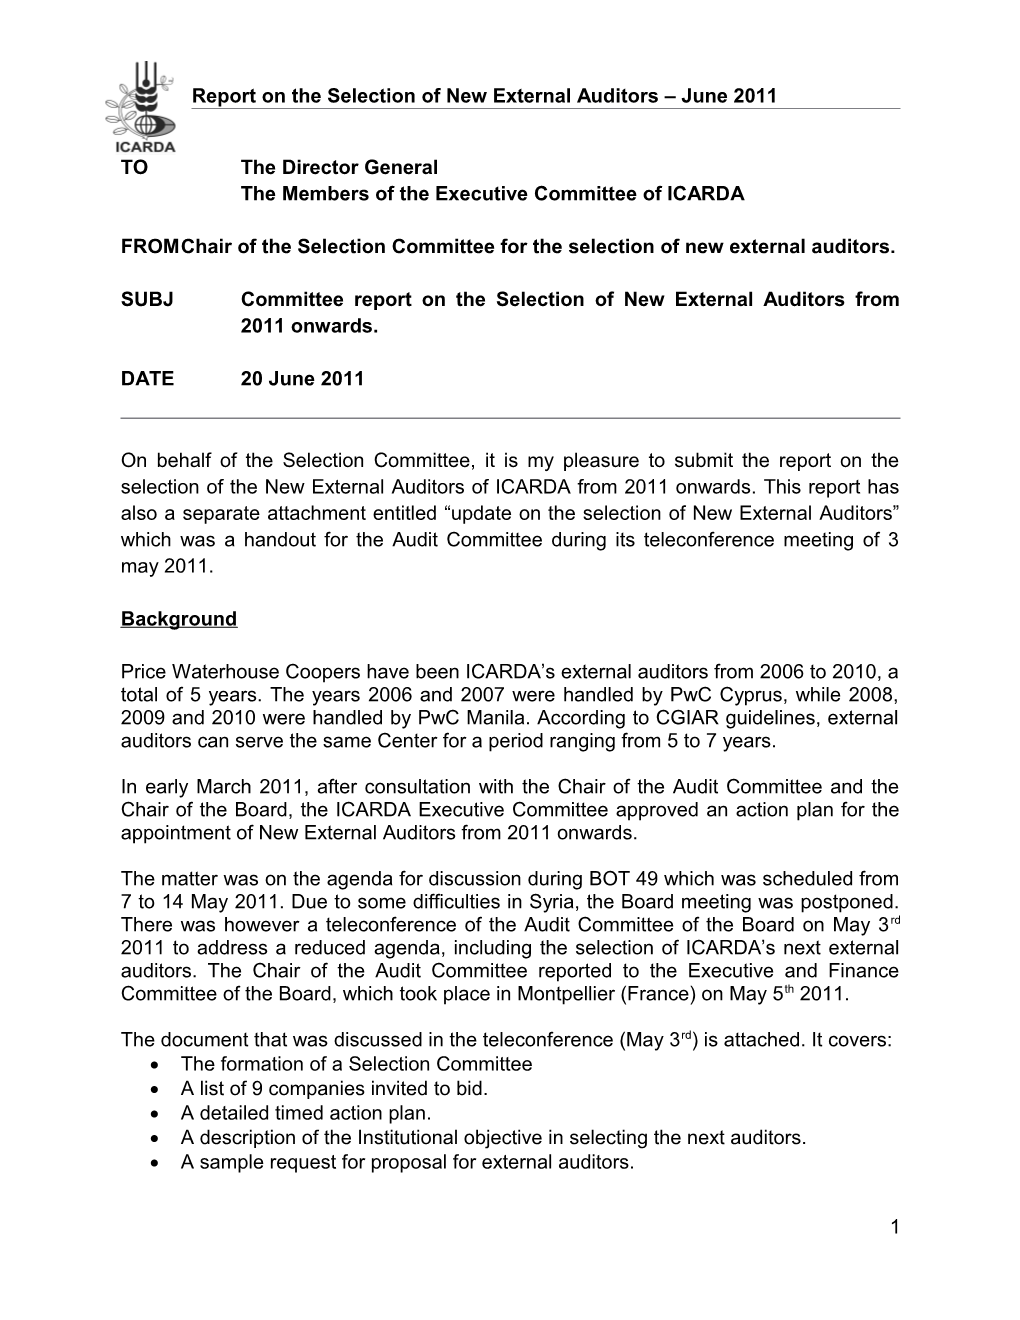 Report on the Selection of New External Auditors June 2011